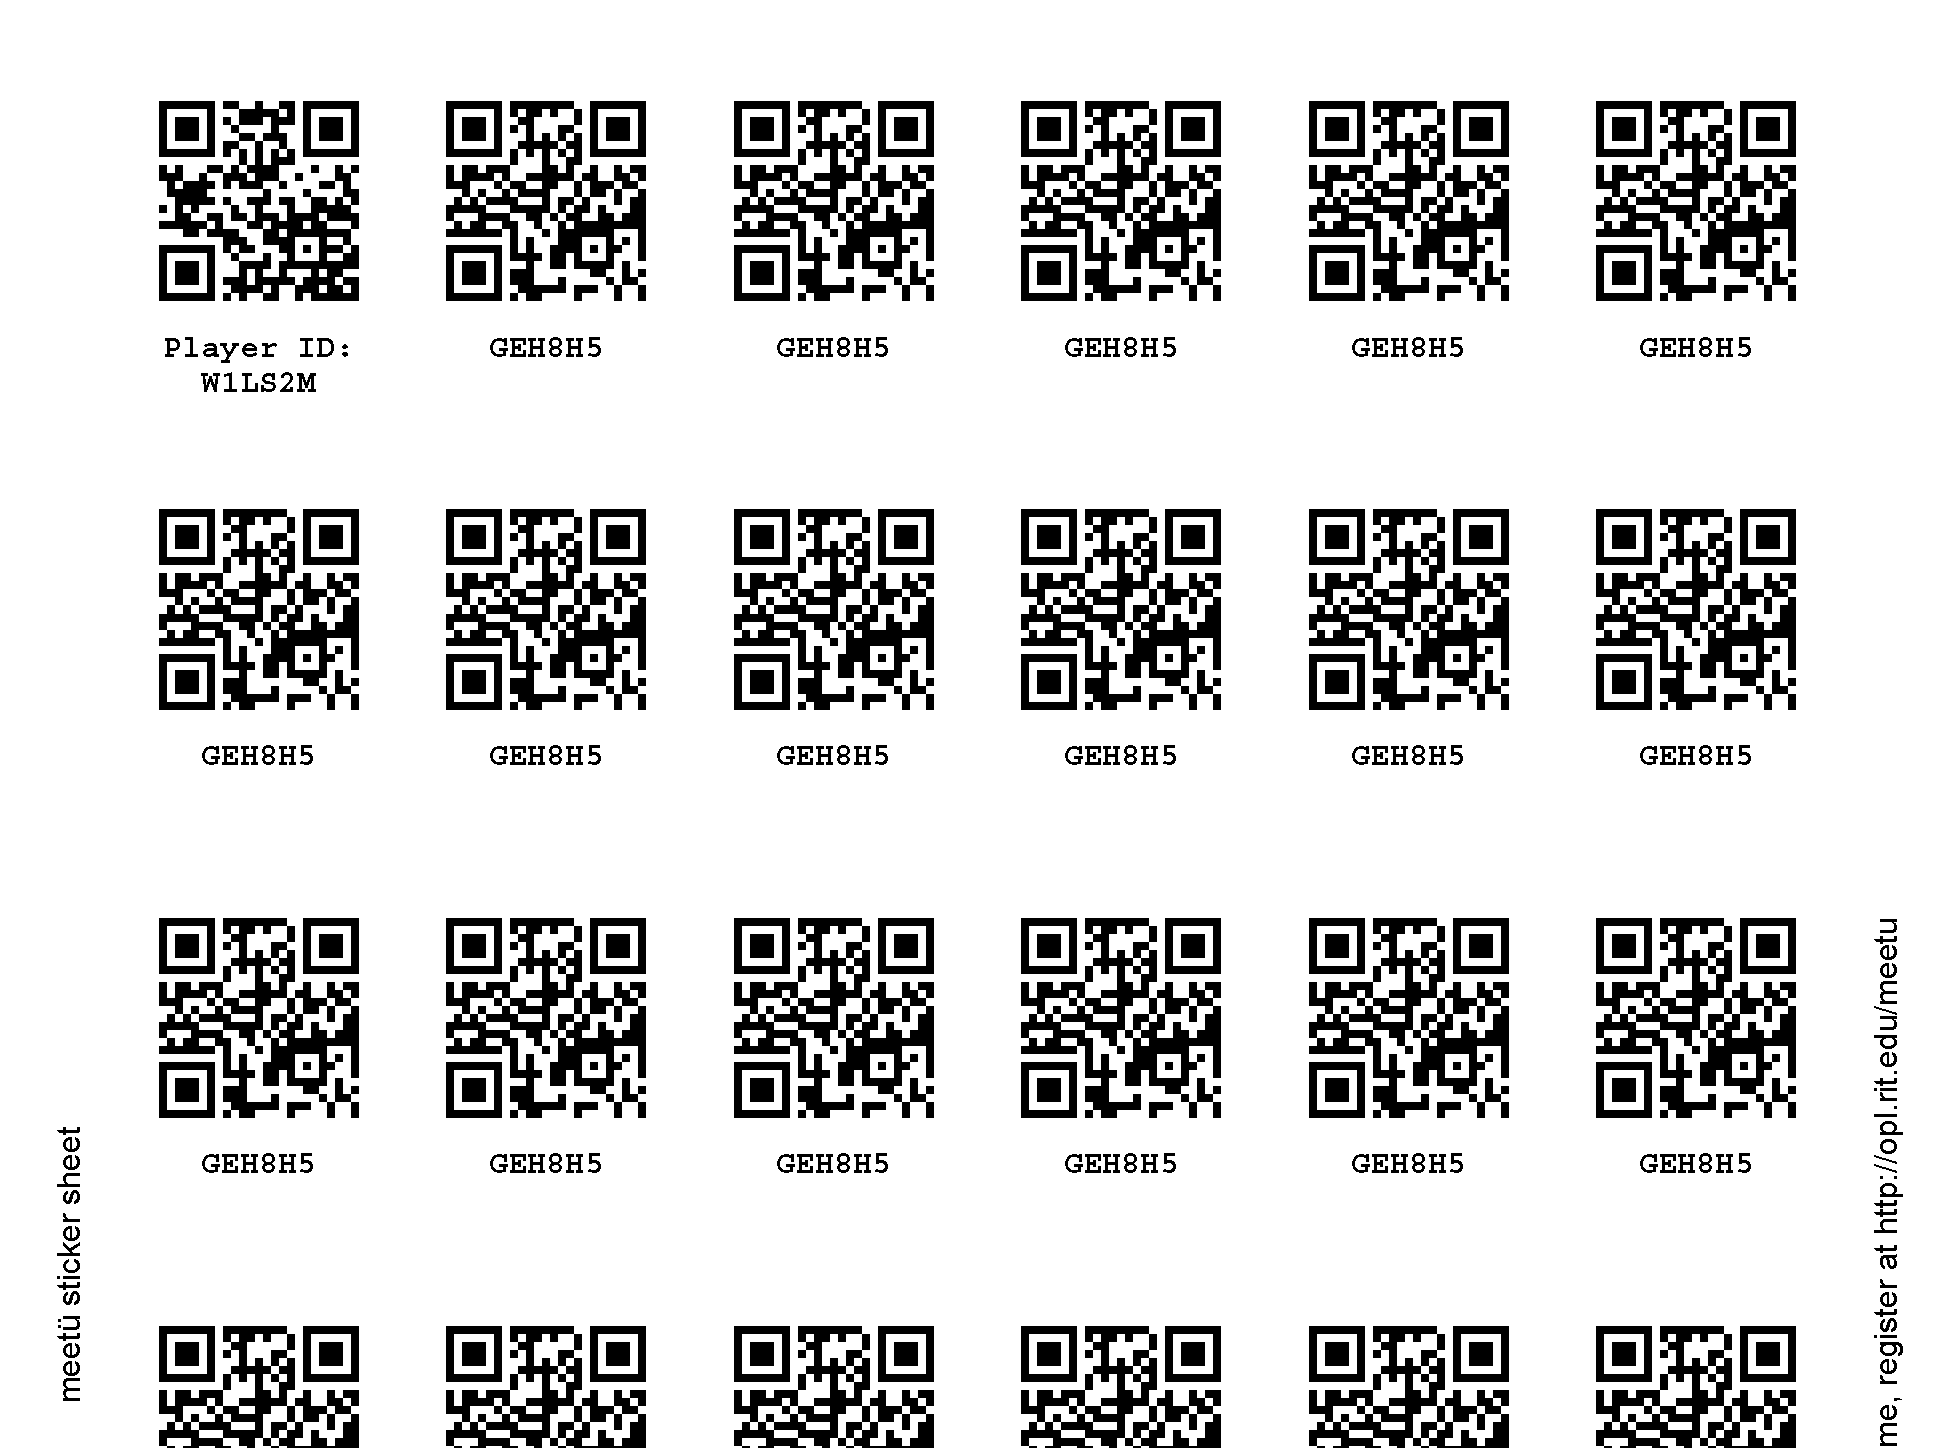 how-to-not-use-qr-codes-by-qrcodefansite-on-deviantart